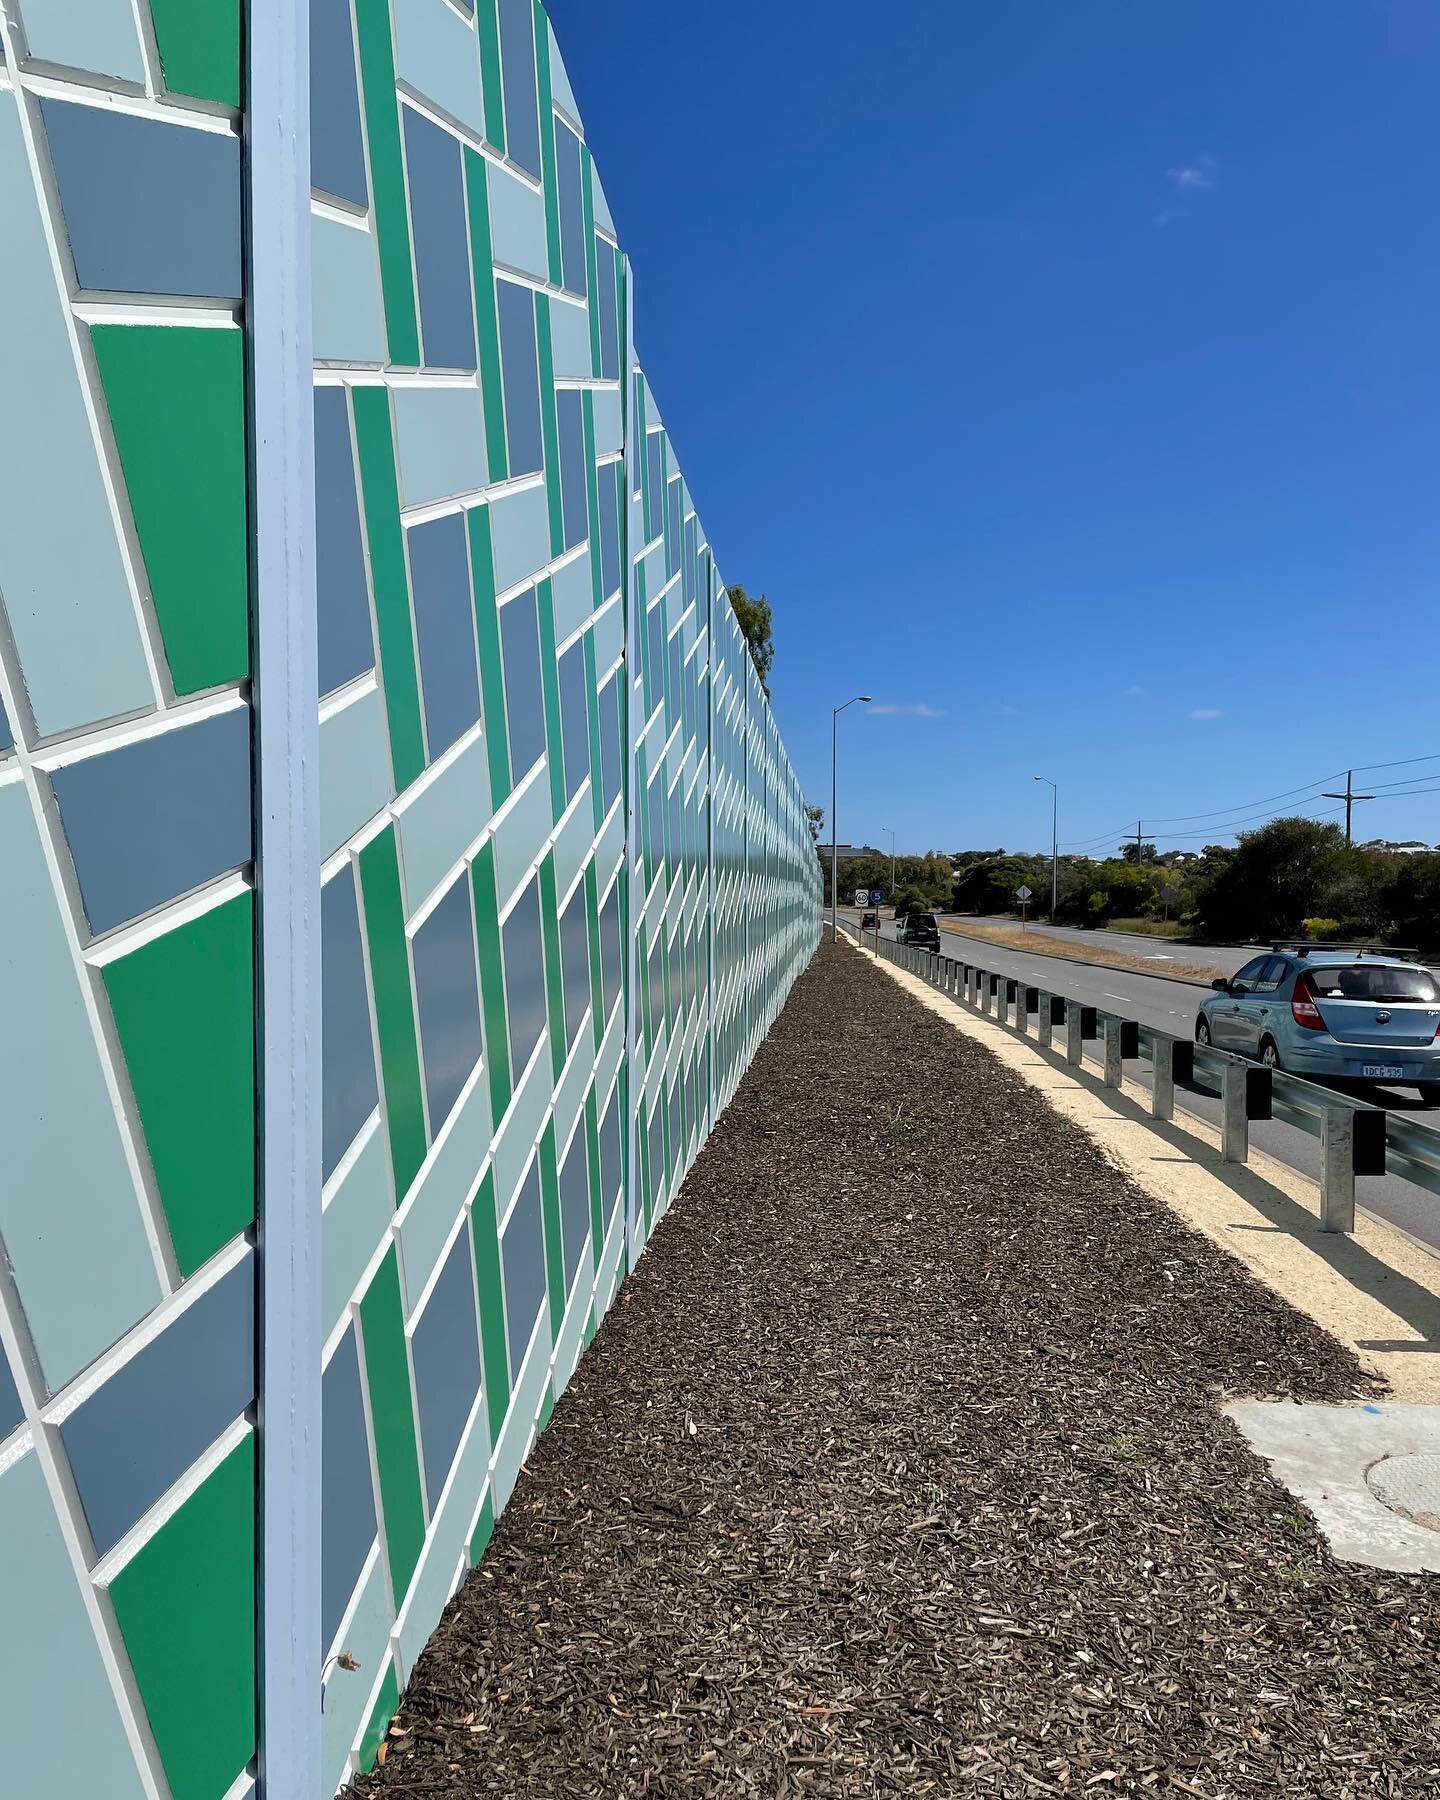 Words fail to describe the 
the recently completed interchange from hell project in Fremantle - urban vandalism has physically split a community for the benefit of the heavy vehicle. 
No provision for pedestrians or cyclists on the ground plane and a